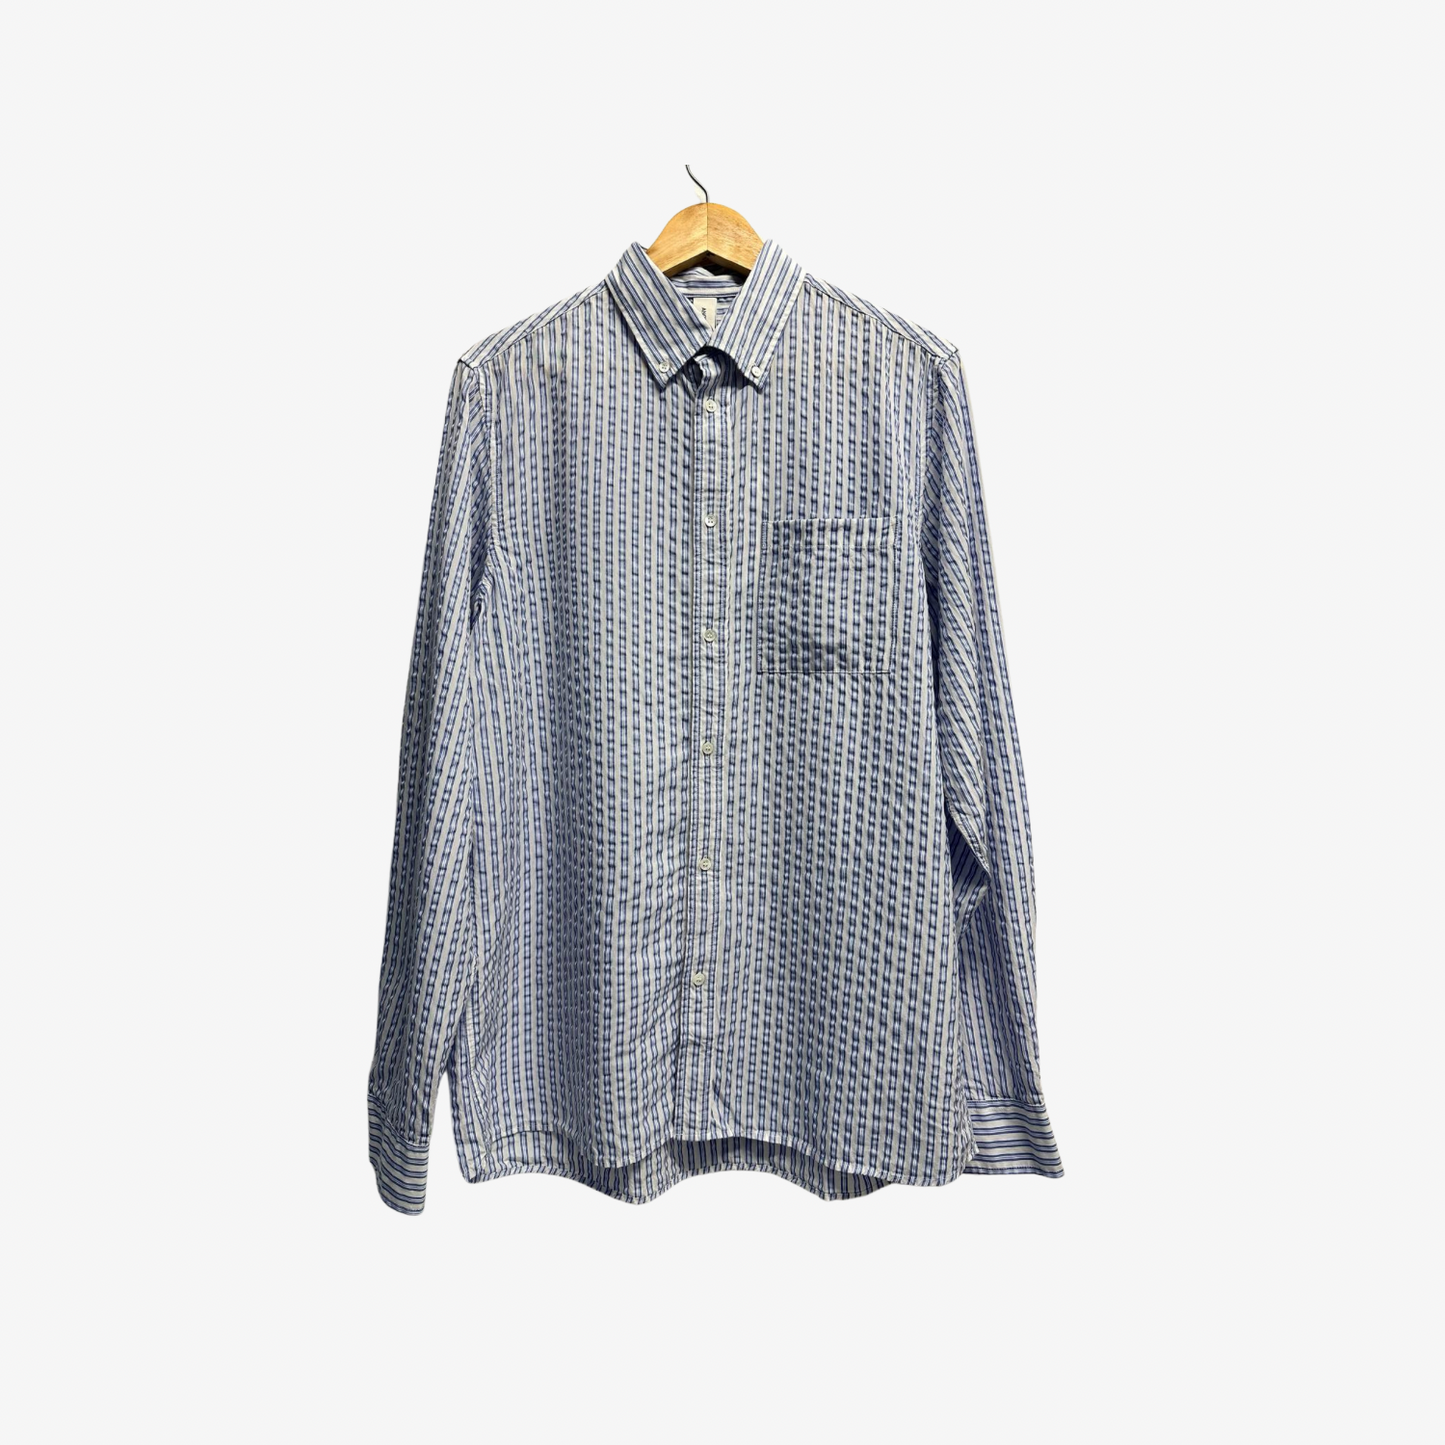 Another Aspect Another Shirt 1.0 - Hockney Stripe